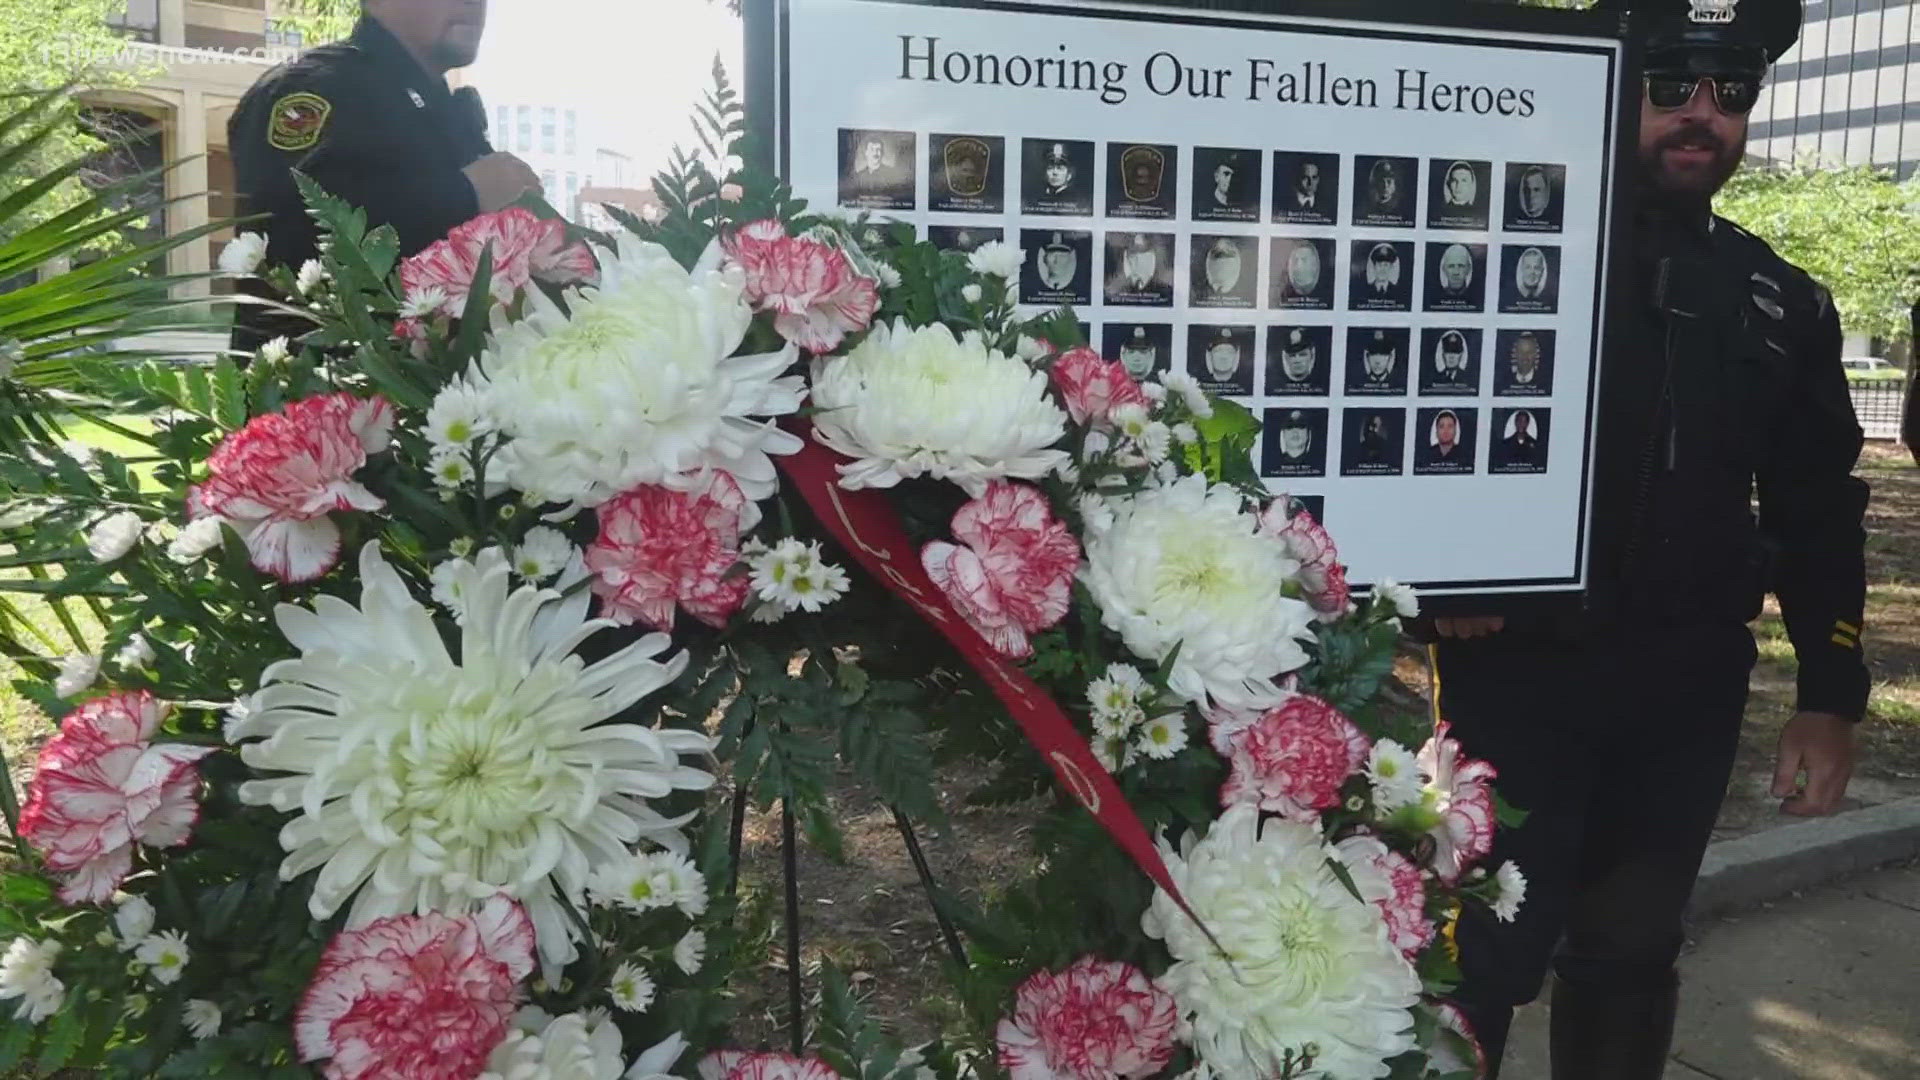 The Norfolk Police Department will hold its annual Memorial Service.